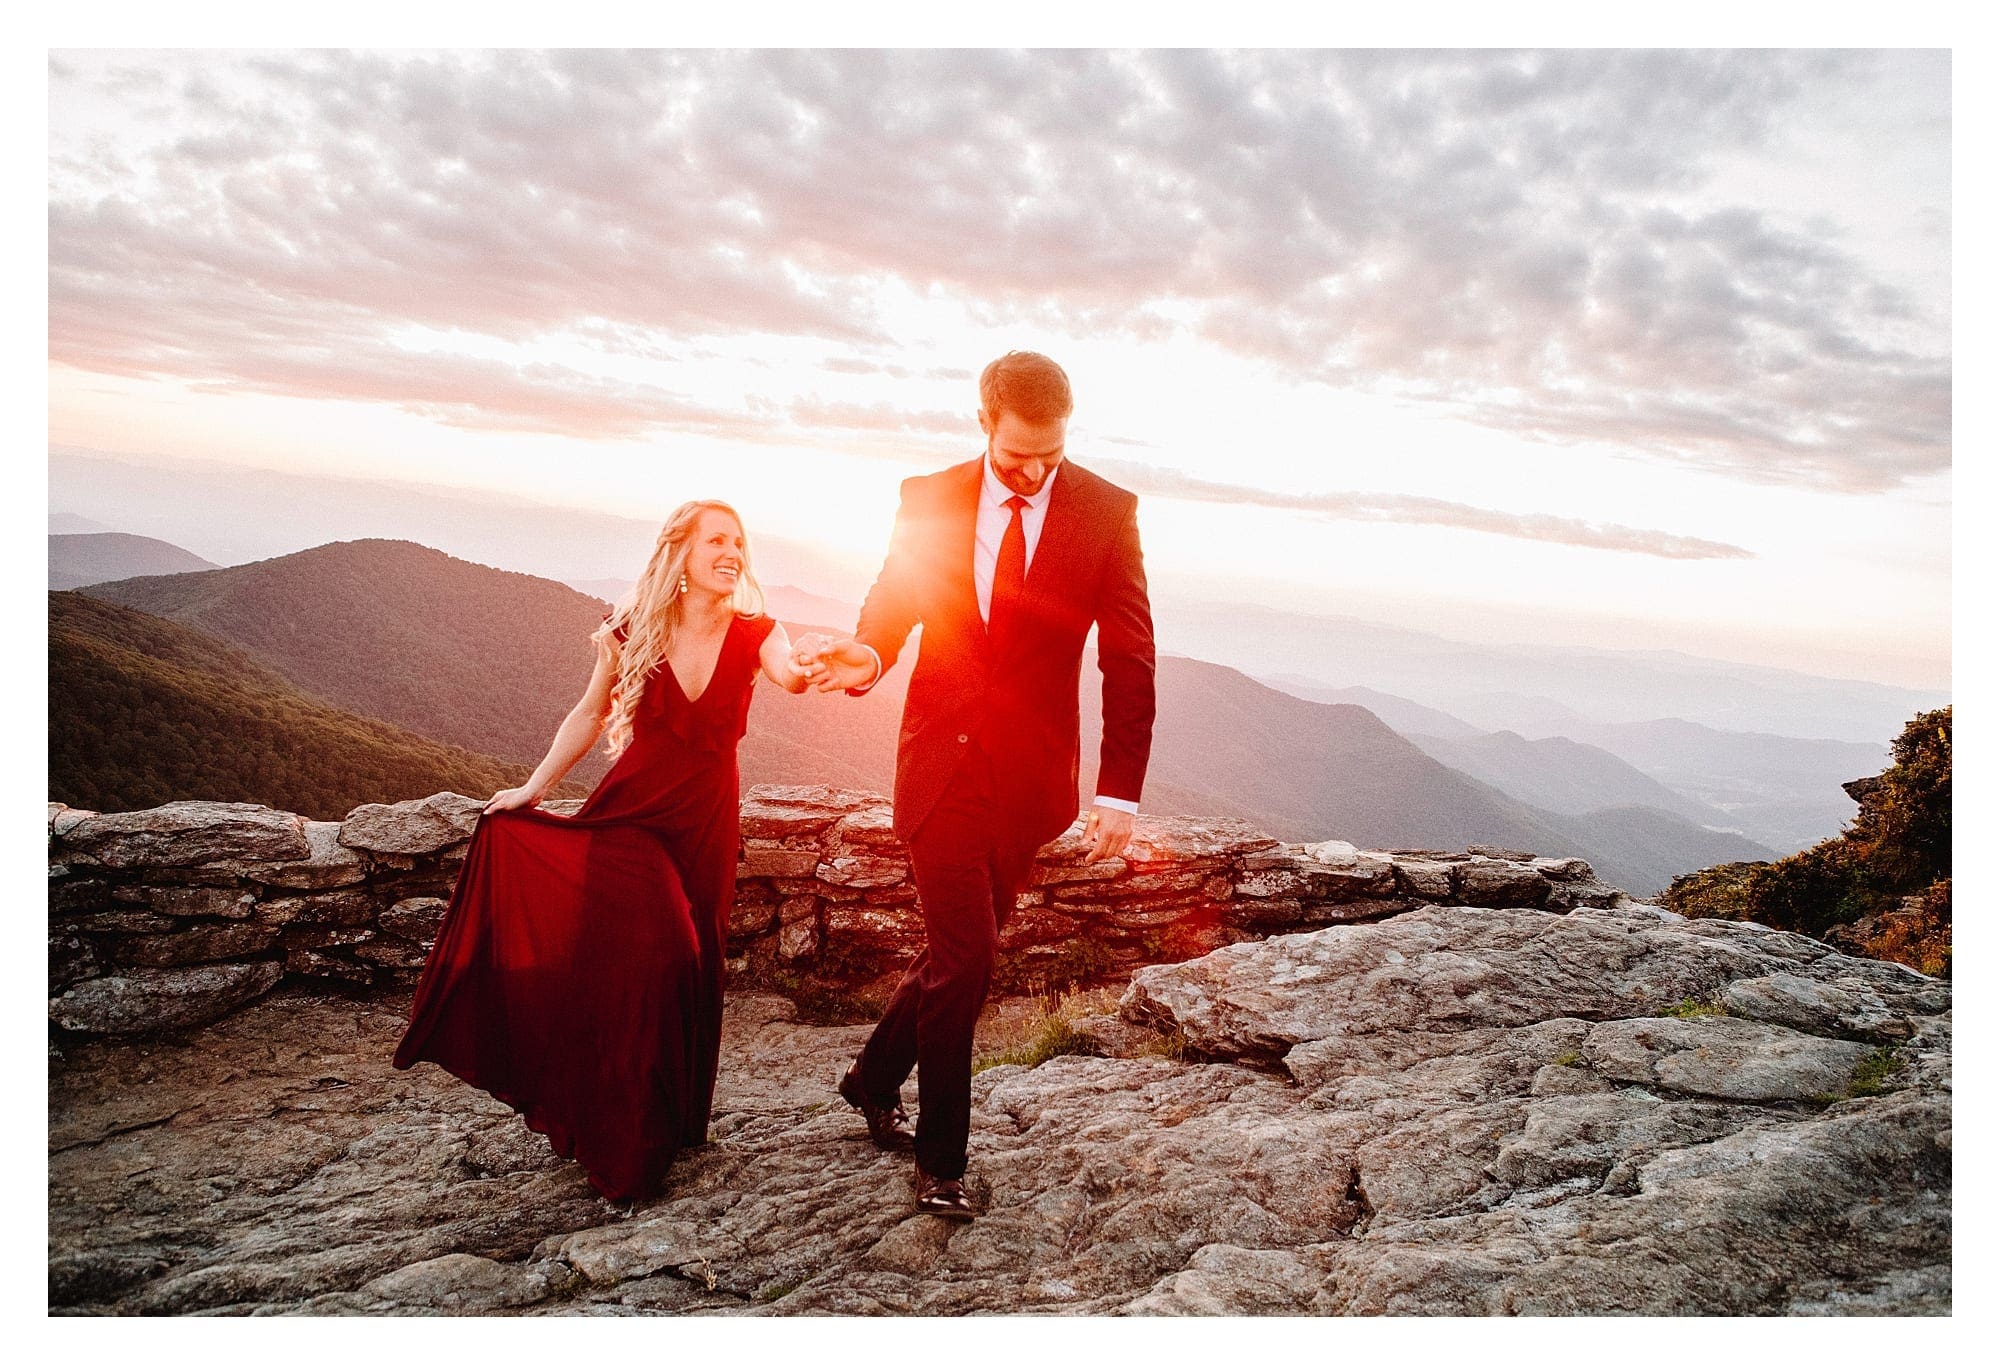 Man in suit holding fiances hand walking along rocky mountain side with mountain range in background at sunset